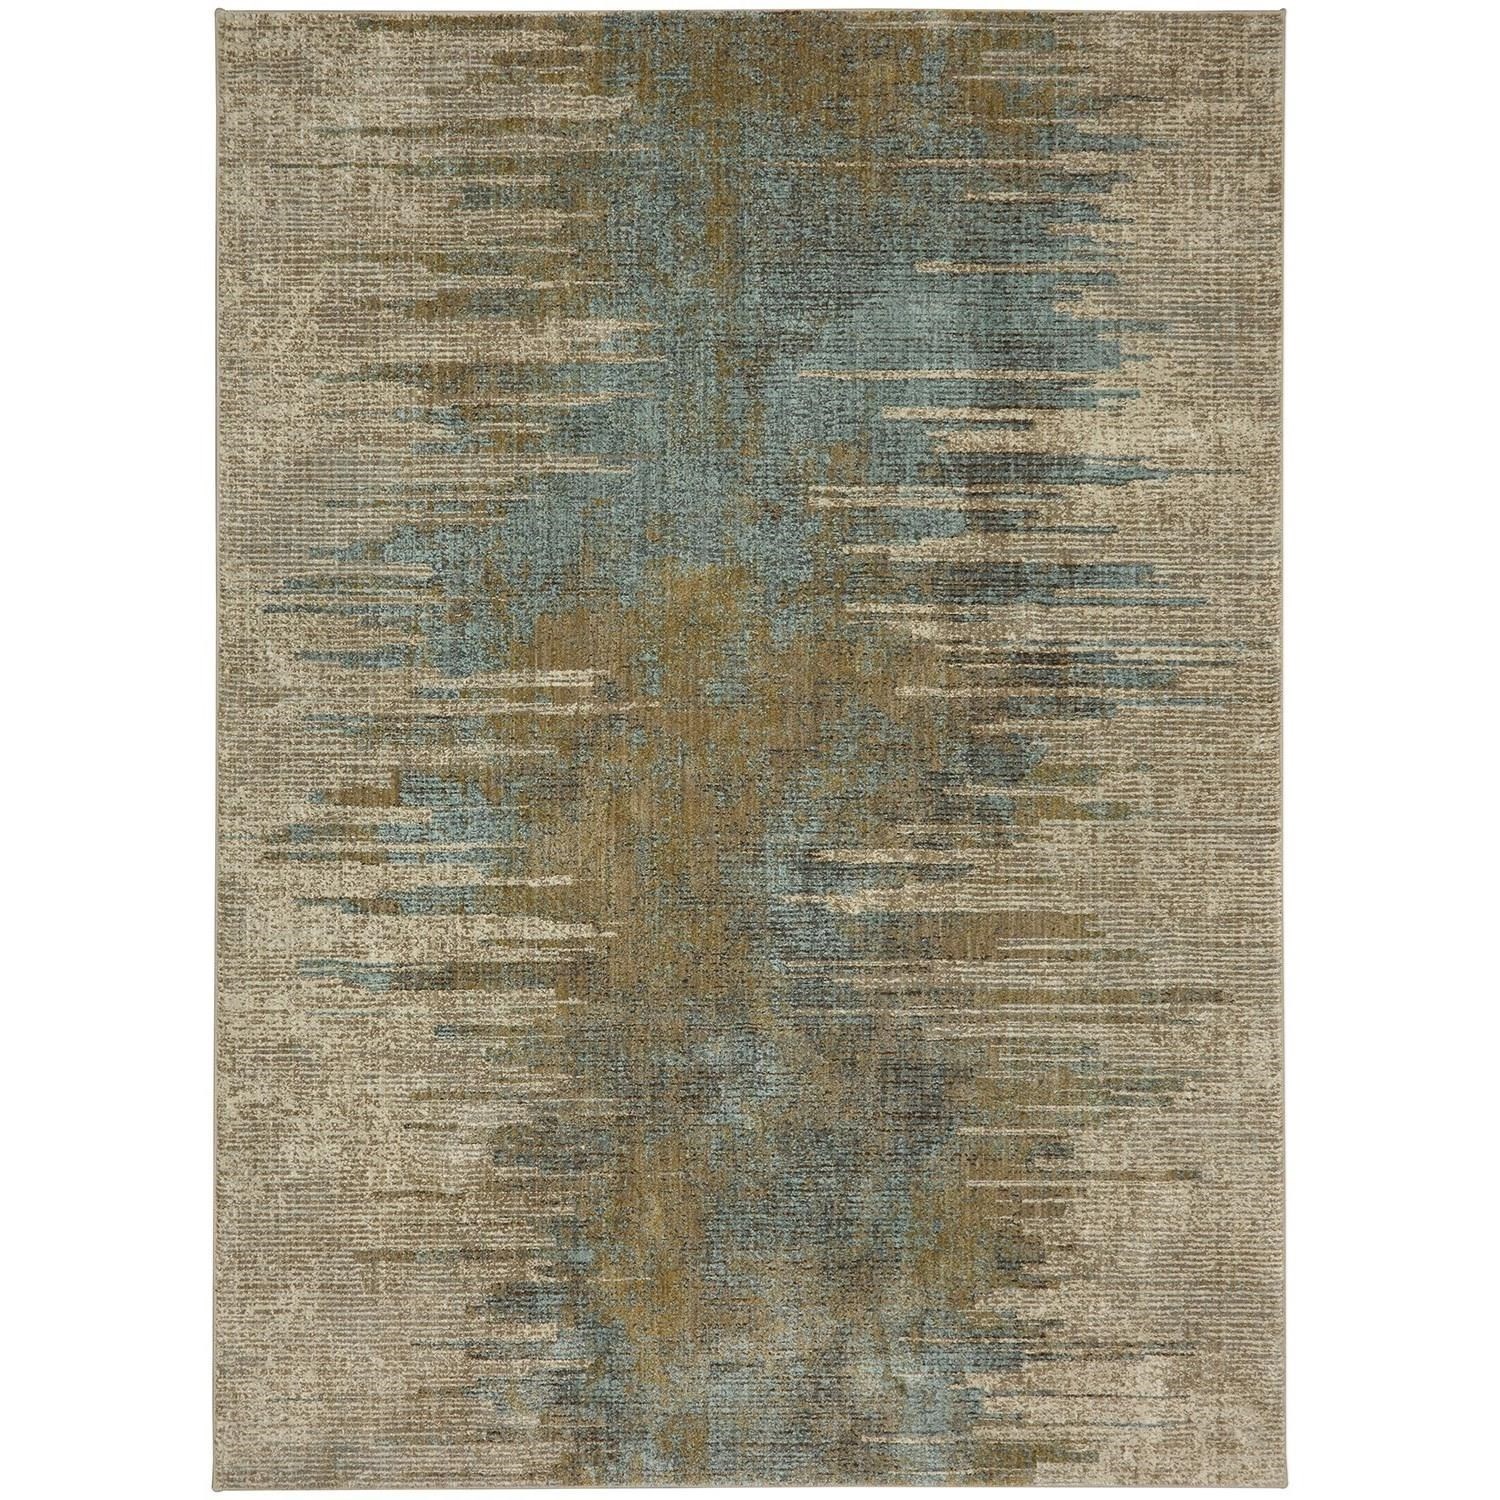 3' 6"x5' 6" Rectangle Abstract Area Rug